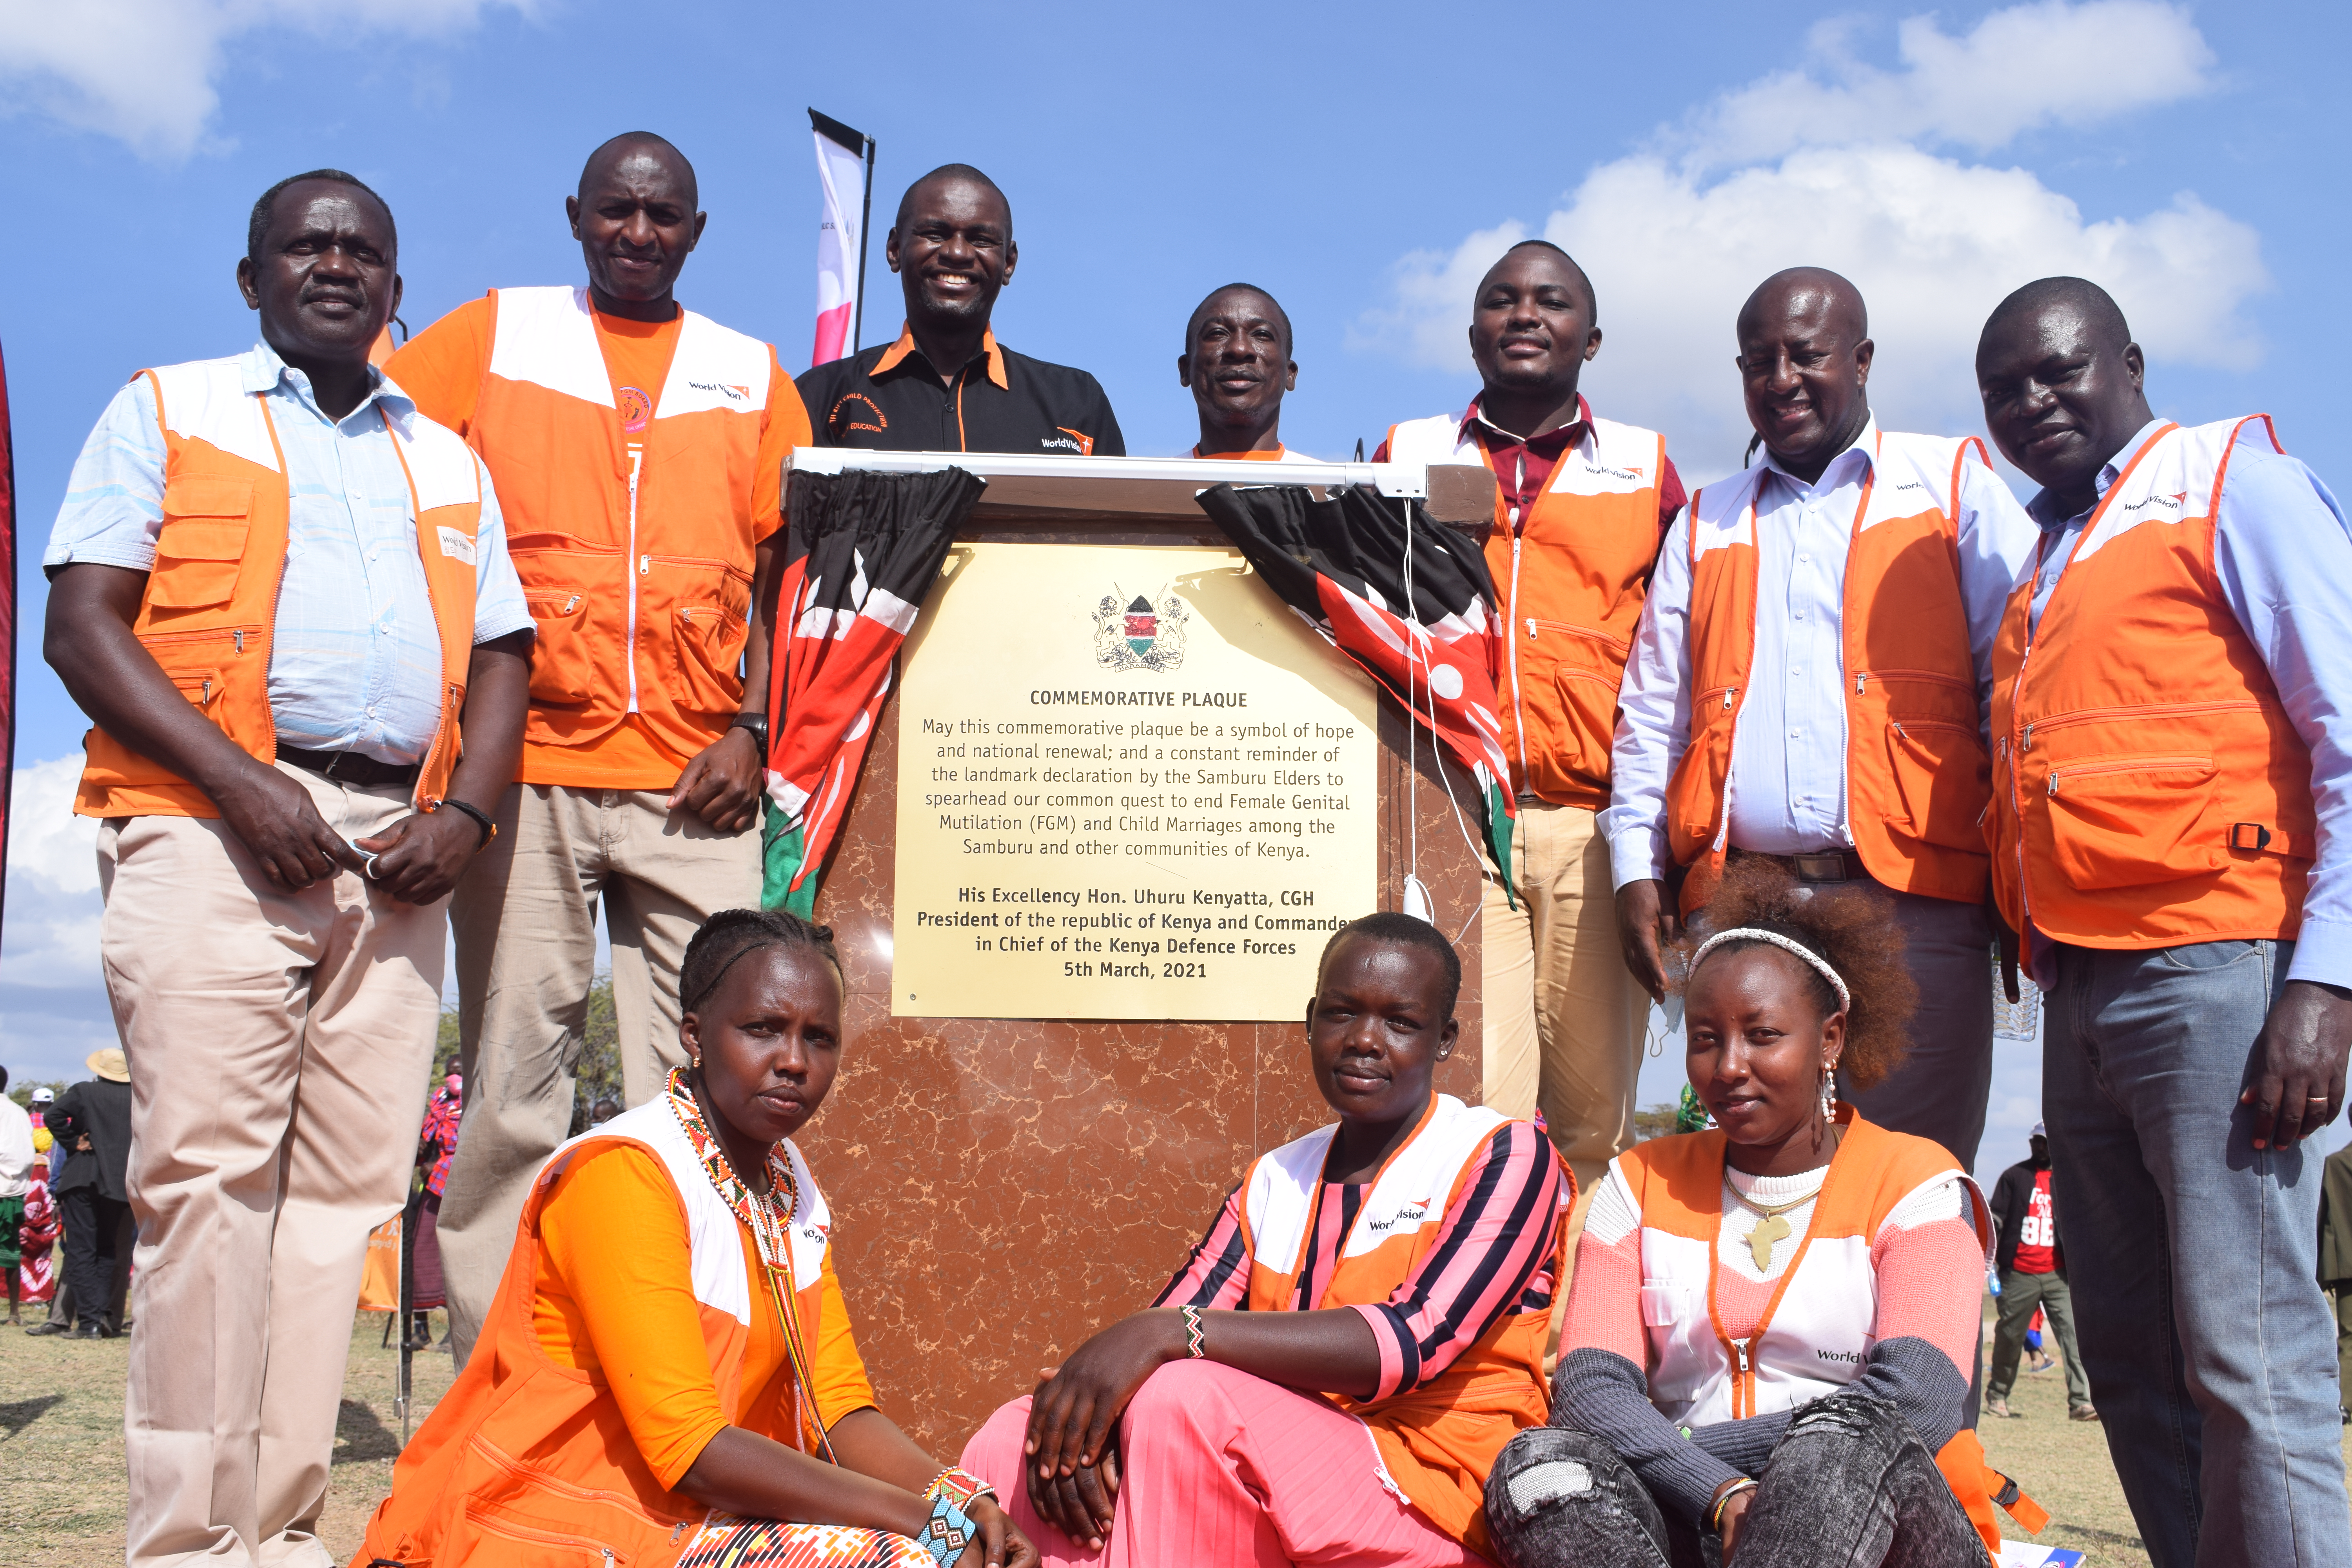 World Vision staff at the Kisima Declaration Commemorative Plaque. Elders from Samburu, where the FGM prevalence rate is 86%, made a declaration to #EndFGM and #ChildMarriage in their community